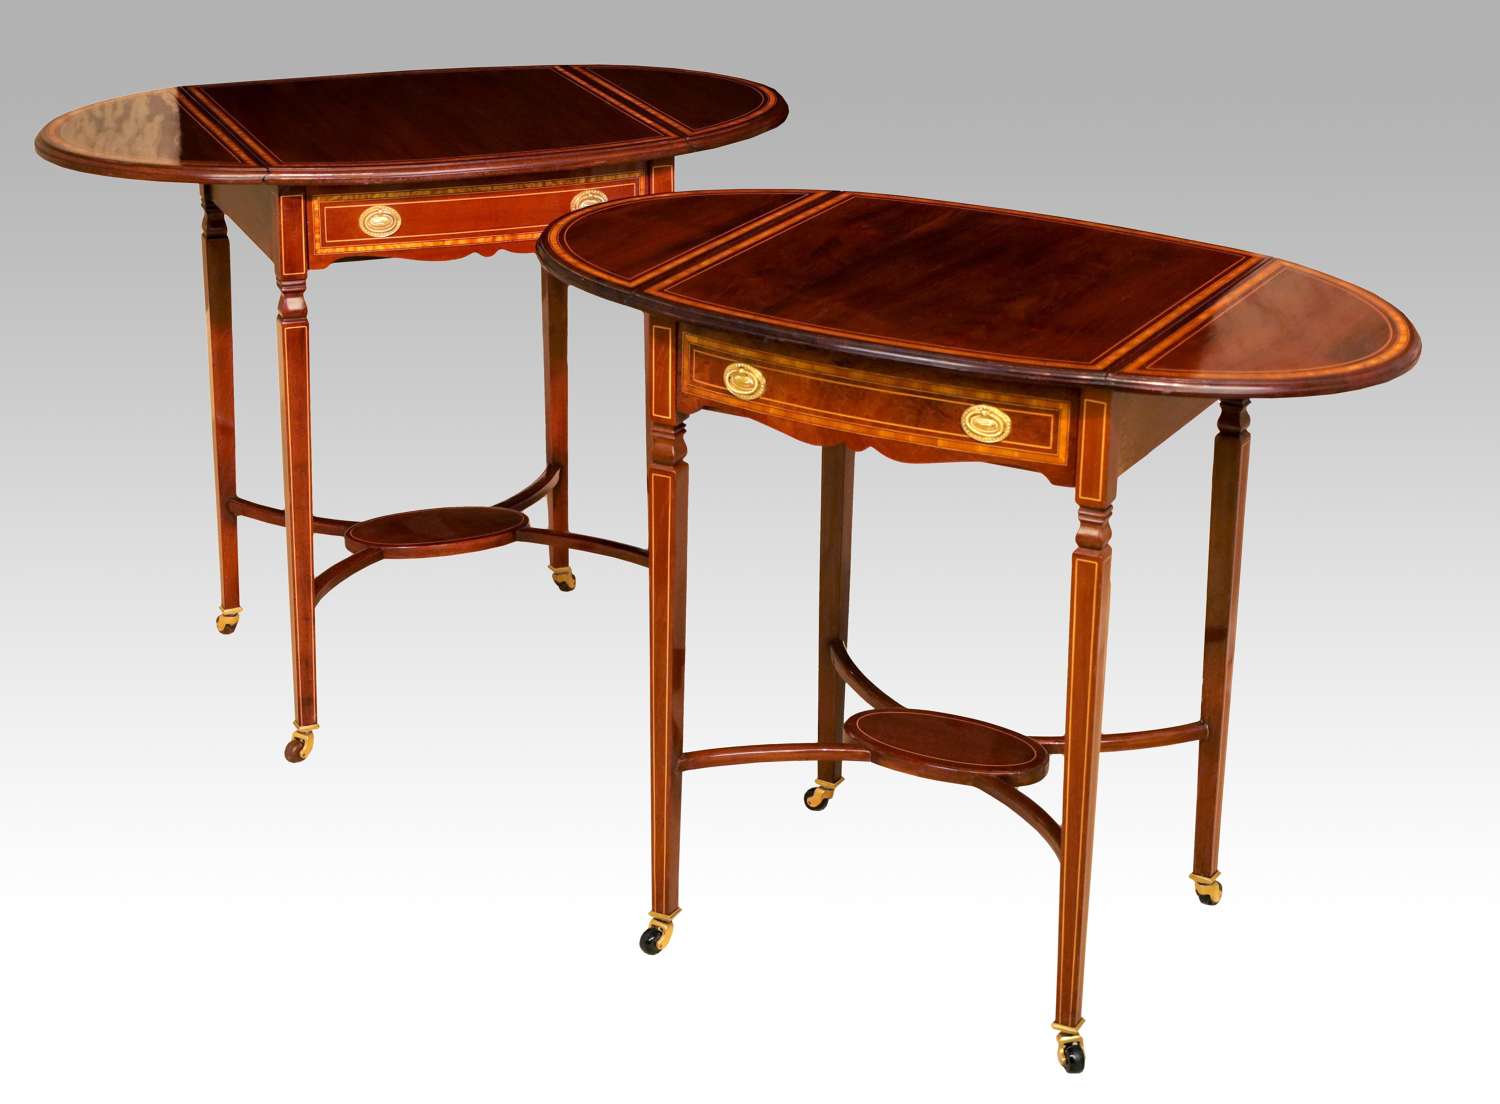 A Quality Pair of Victorian Mahogany Inlaid Drop Leaf Side Tables